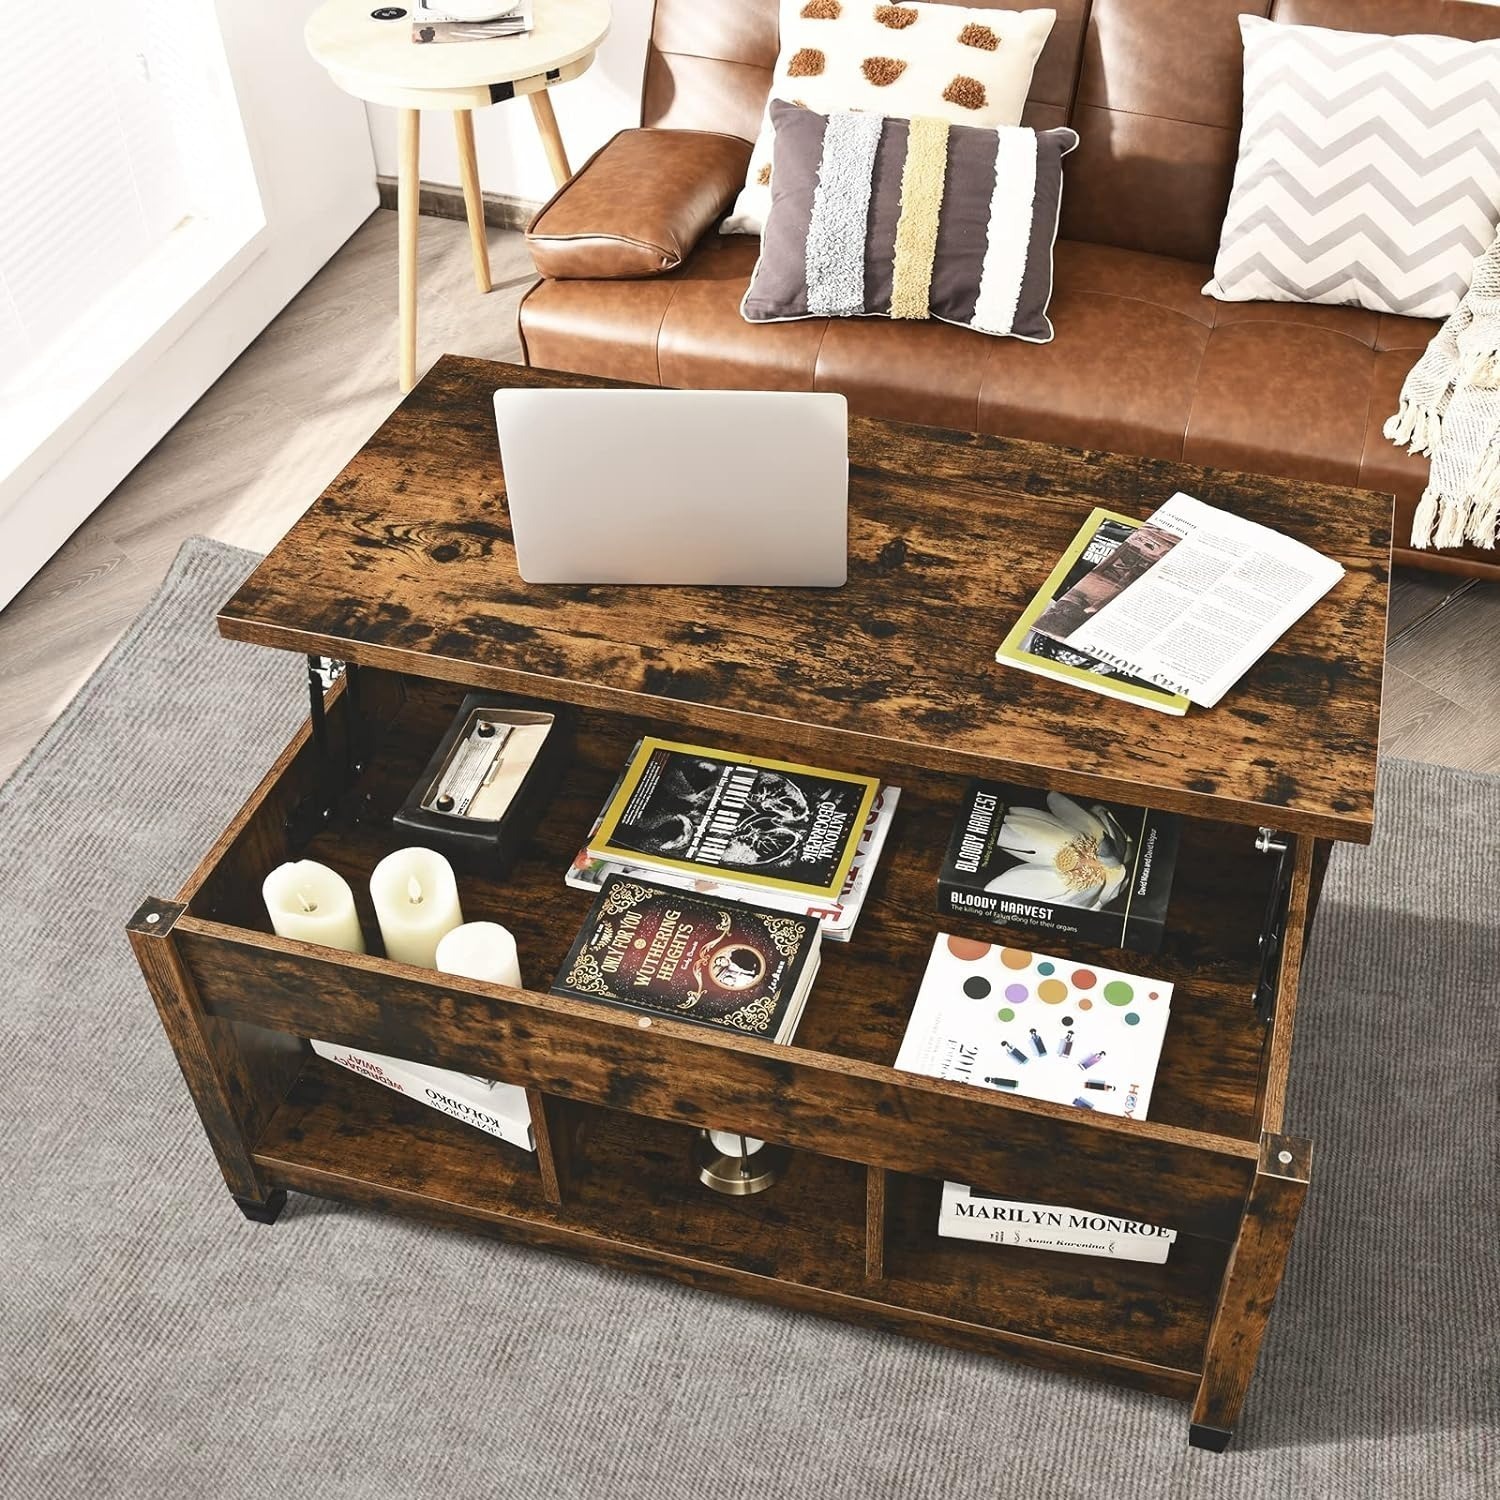 Wood Lift Top Modern Coffee Table w/Hidden Compartment (Rustic Brown) $68.19 + Free Shipping